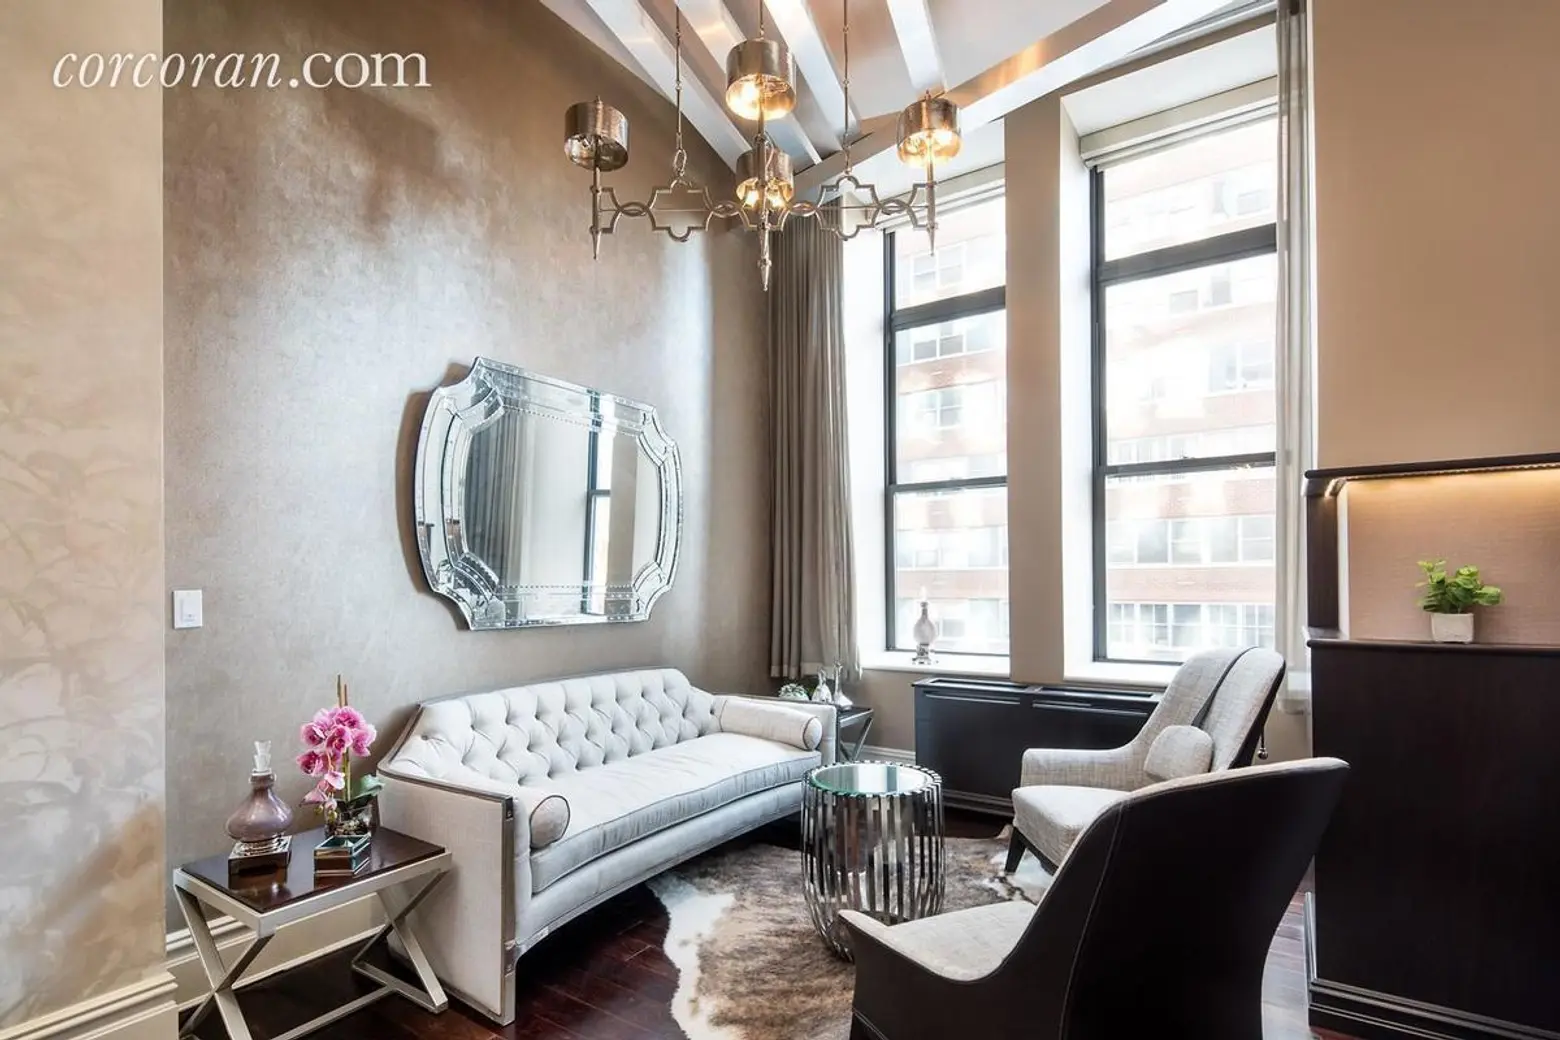 65 West 13th Street, Greenwich Village, celebrities, Shepard Smith, cool listings, condos